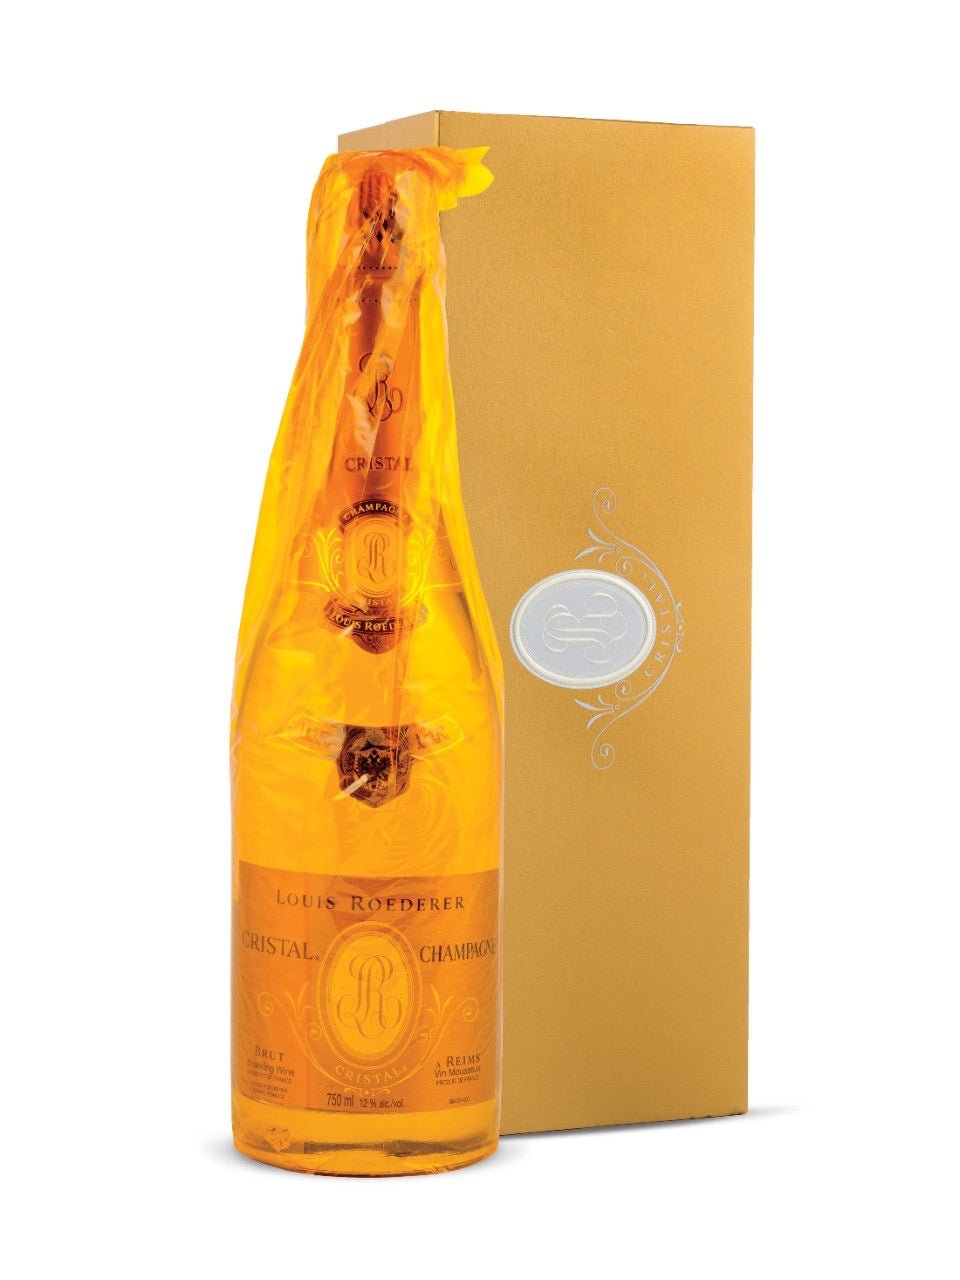 Louis Roederer Cristal Brut Champagne | Exquisite Wine & Alcohol Gift Delivery Toronto Canada | Vyno